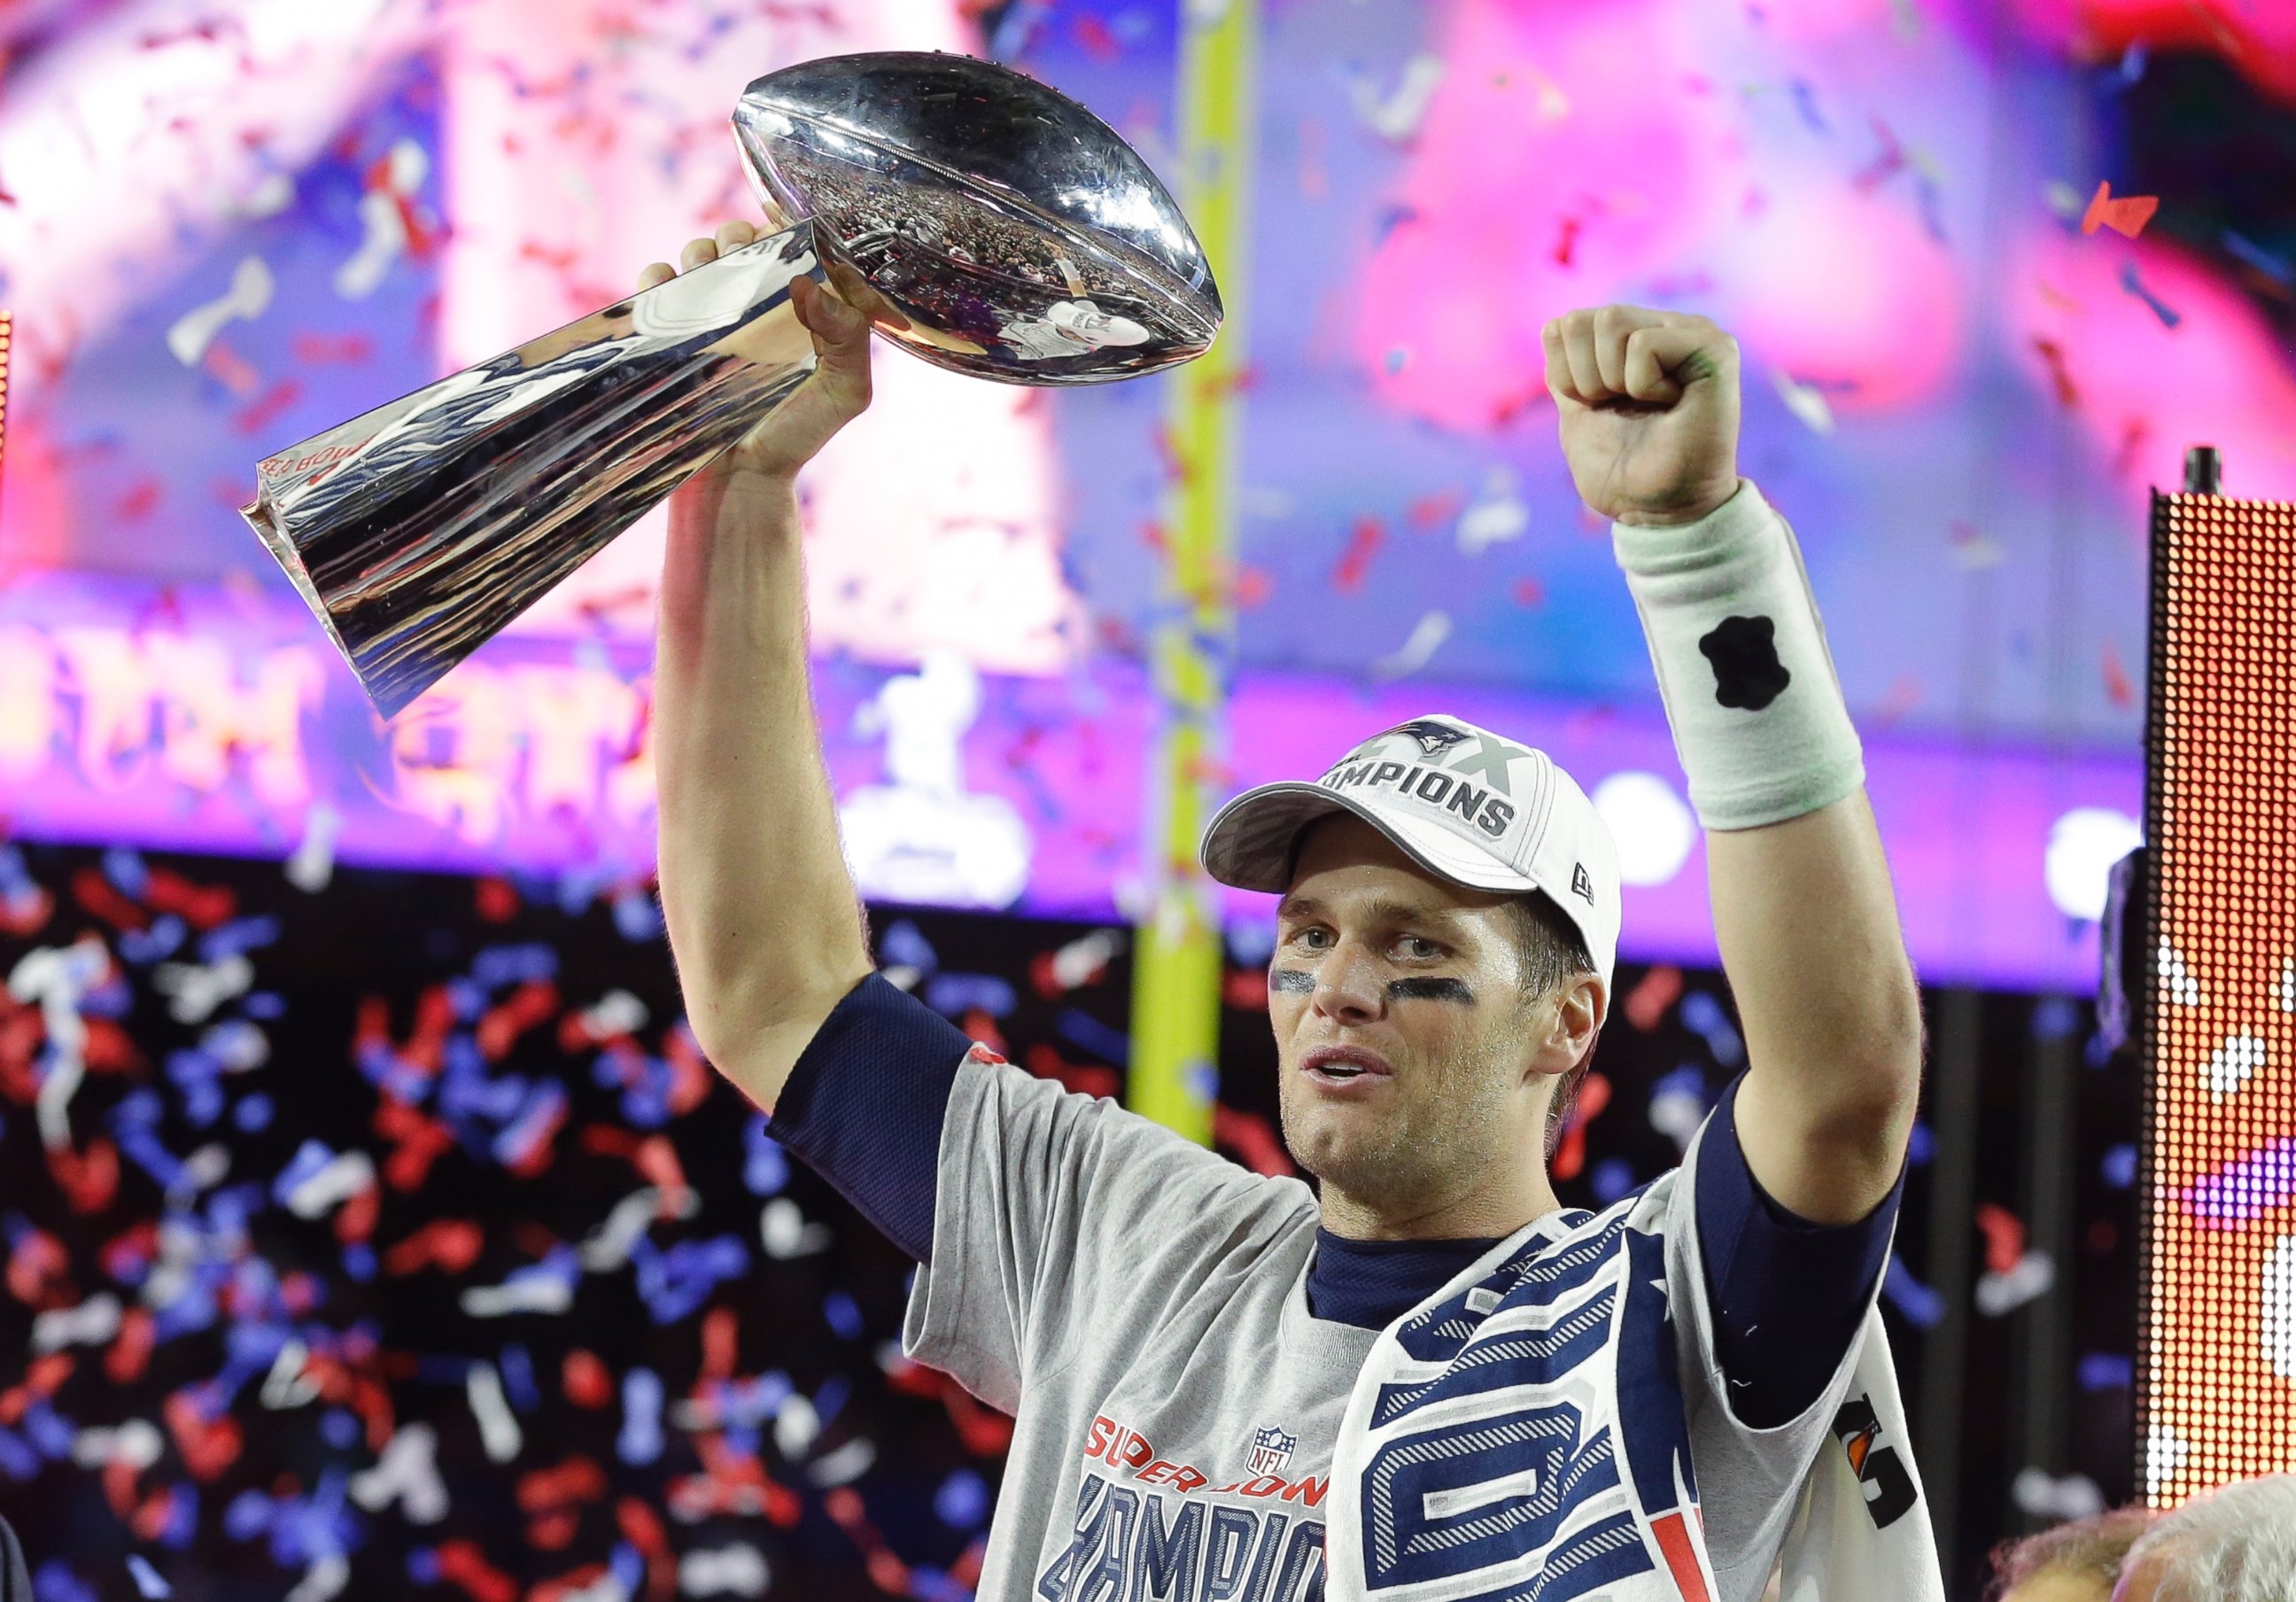 PHOTO: New England Patriots quarterback Tom Brady celebrates with the Vince Lombardi Trophy after the NFL Super Bowl XLIX football game against the Seattle Seahawks, Feb. 1, 2015, in Glendale, Ariz.